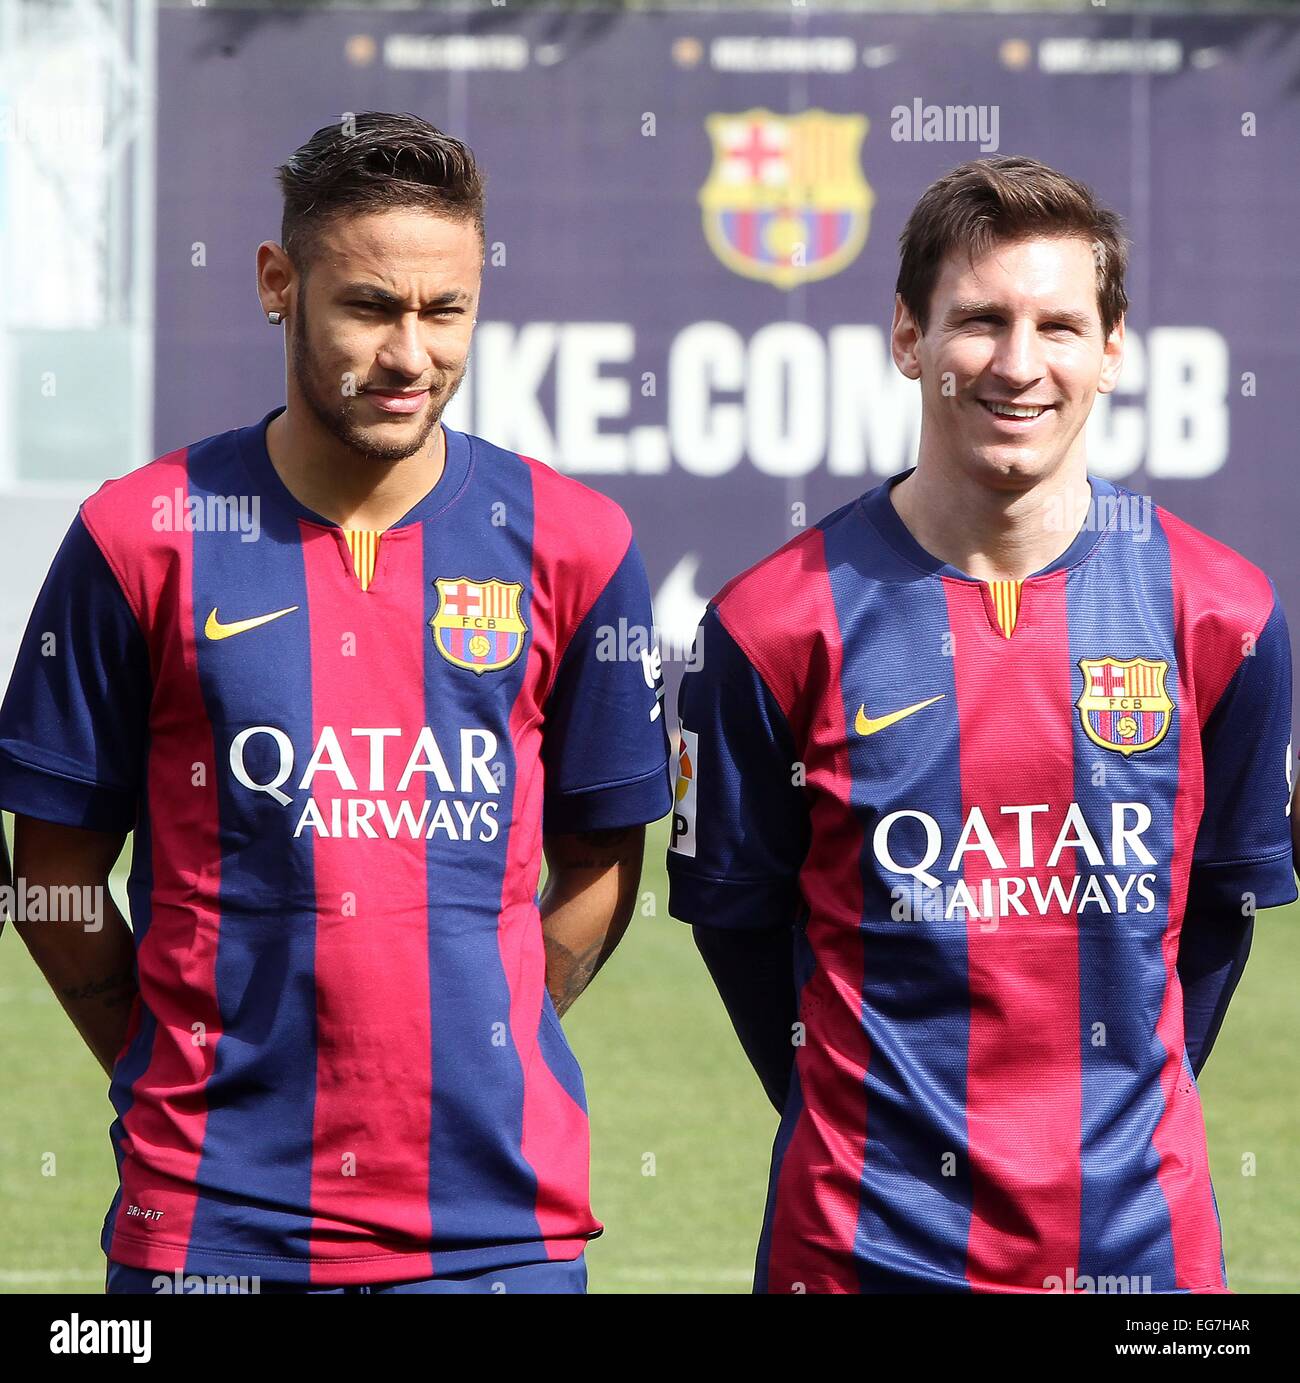 Barcelona, Spain. 18th Feb, 2015. The Barcelona FC team on display.  Barcelona have agreed to sell their TV rights for the 2015-16 season to  Telefonica in a deal worth a reported 140